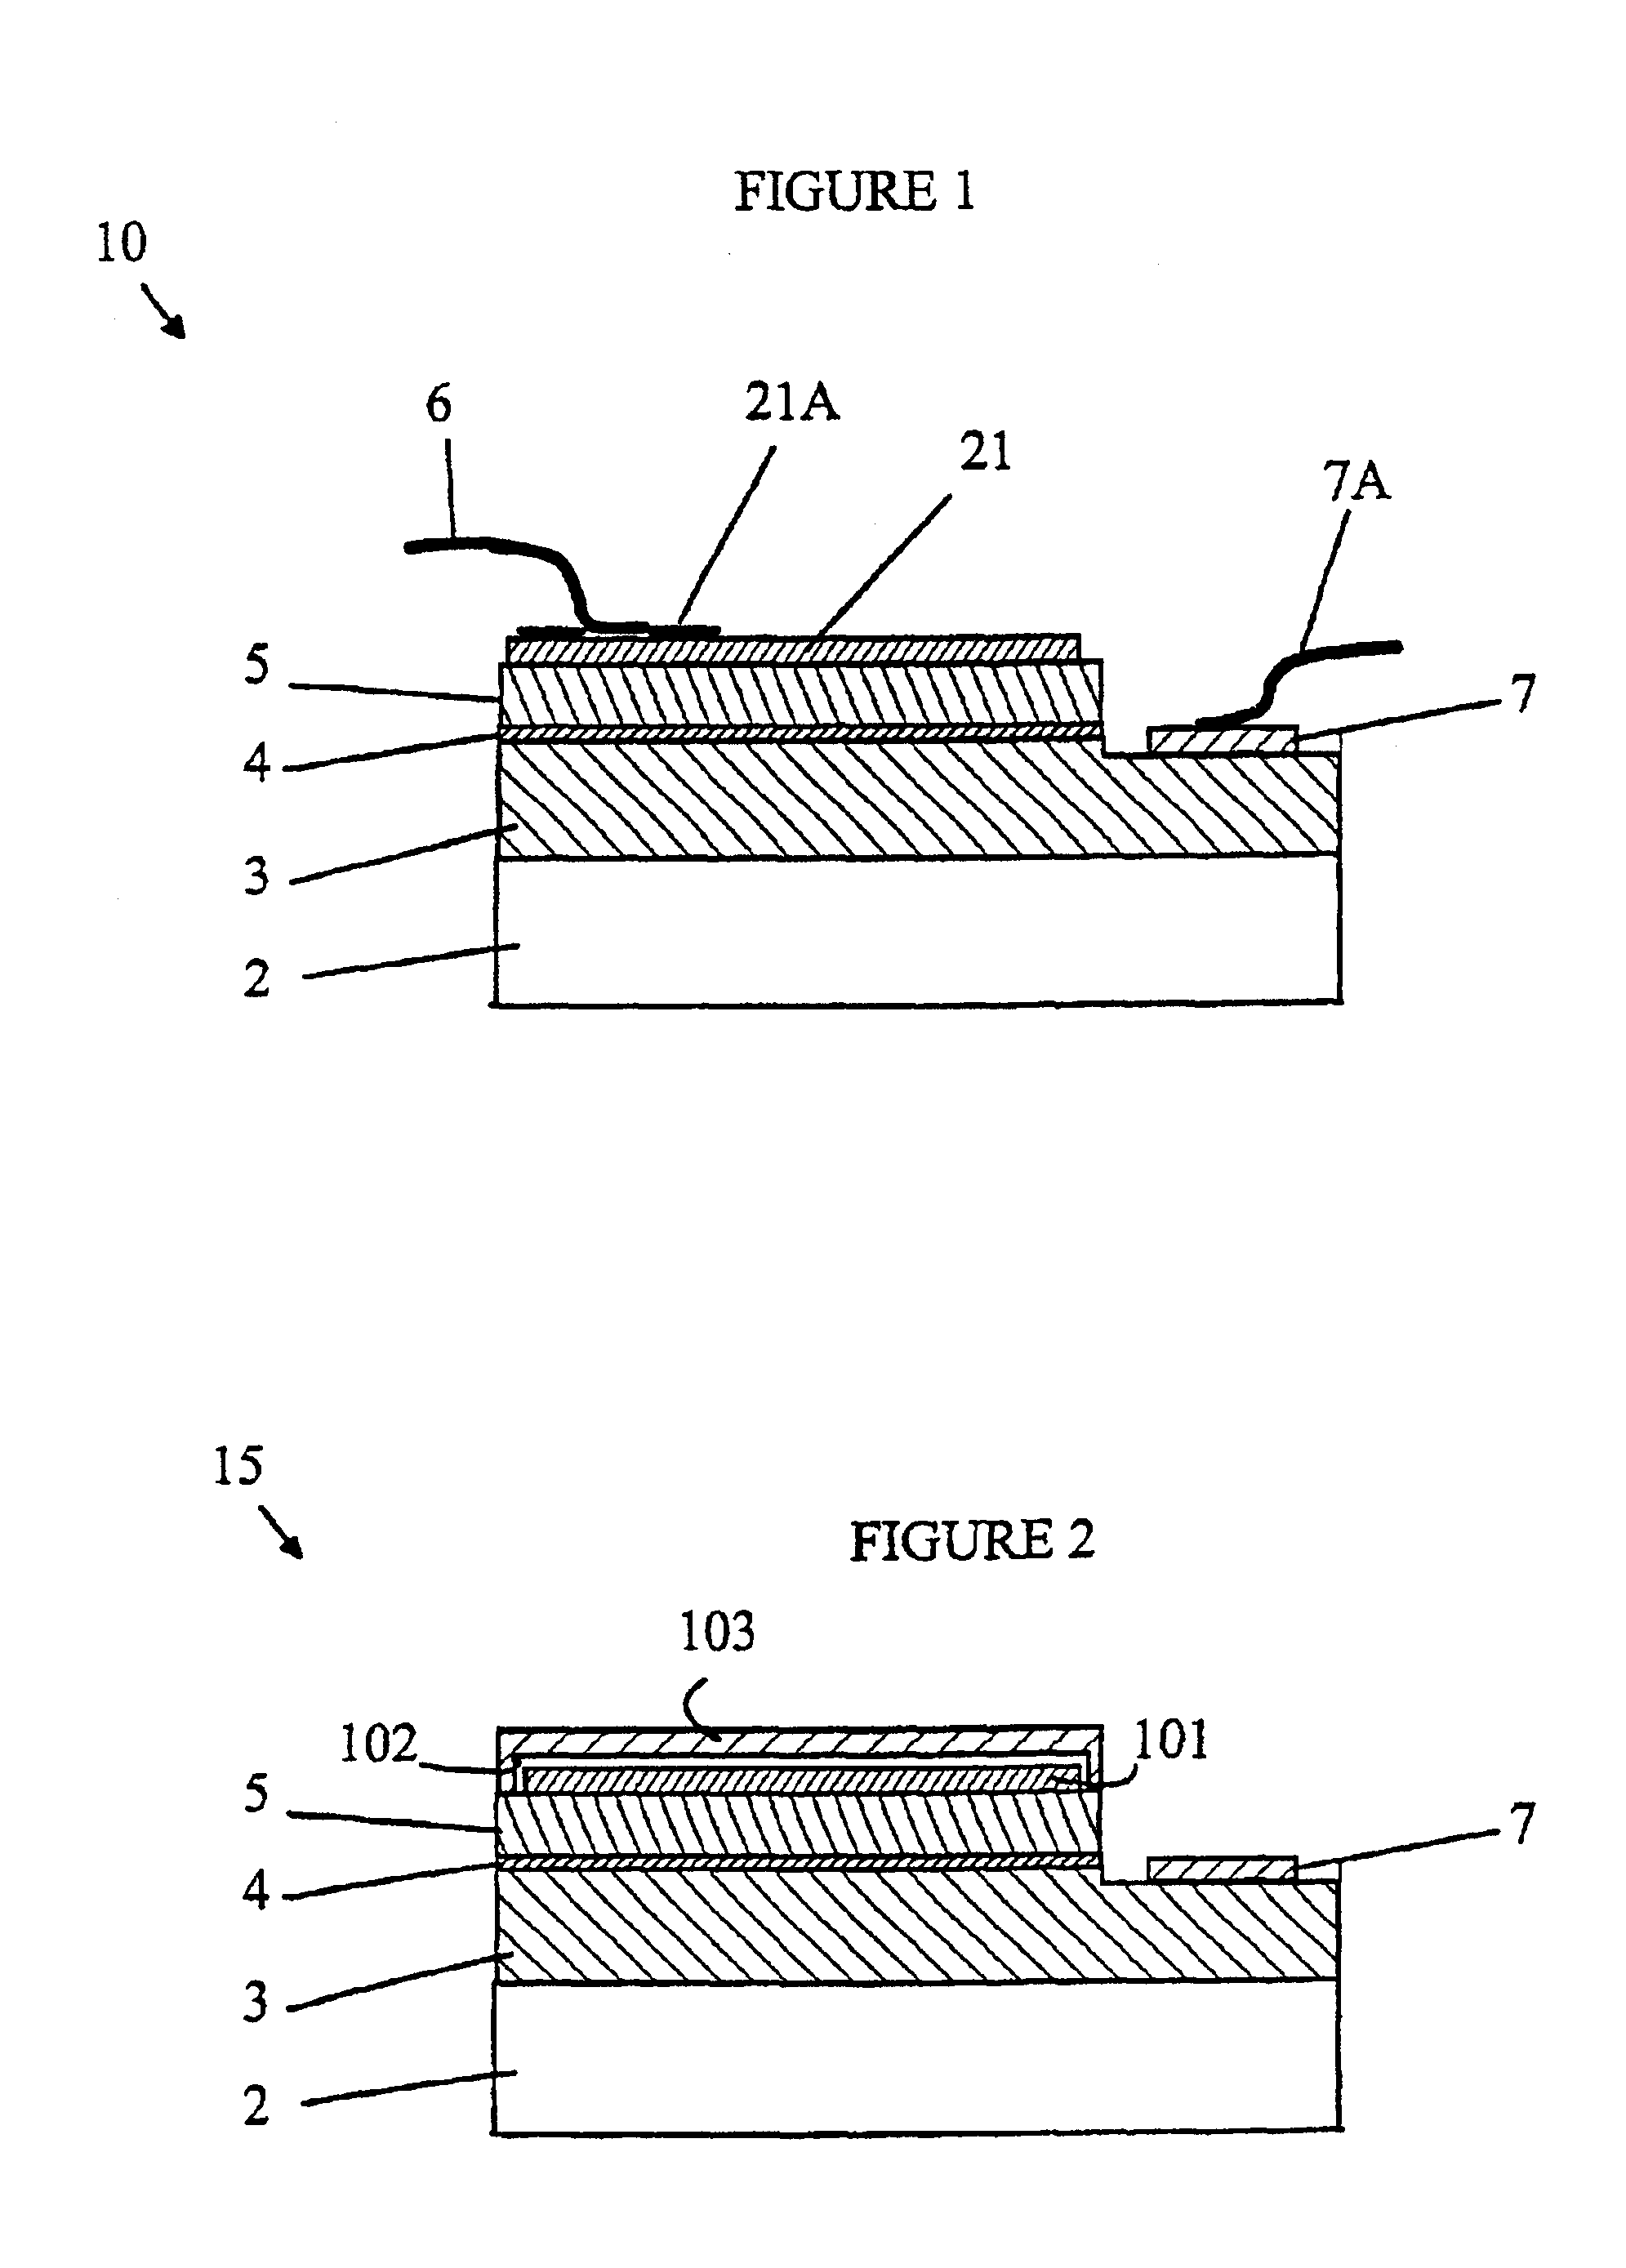 Semiconductor light emitting device having a silver p-contact